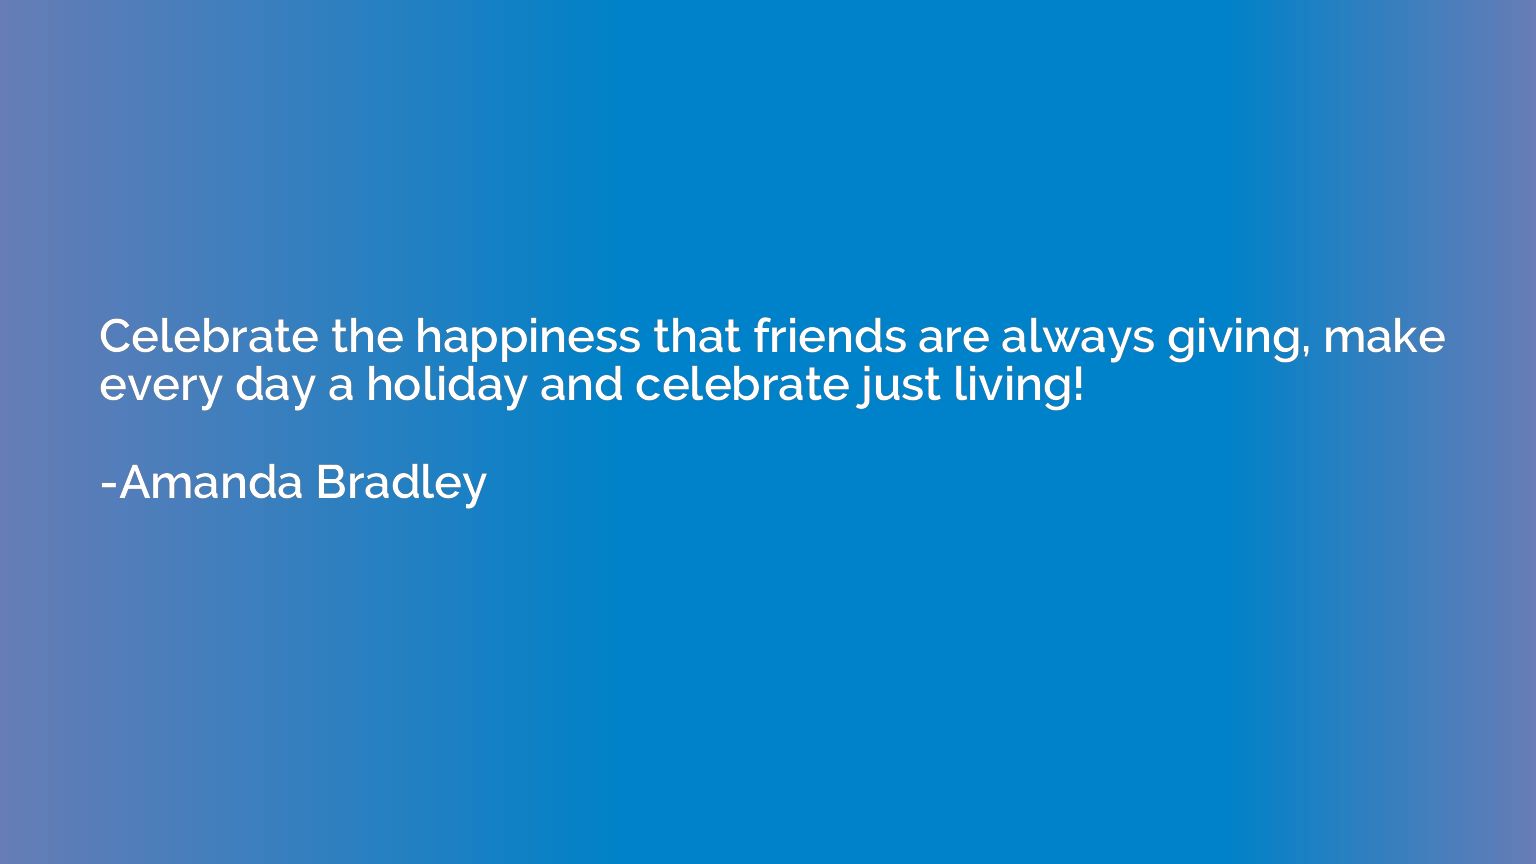 Celebrate the happiness that friends are always giving, make